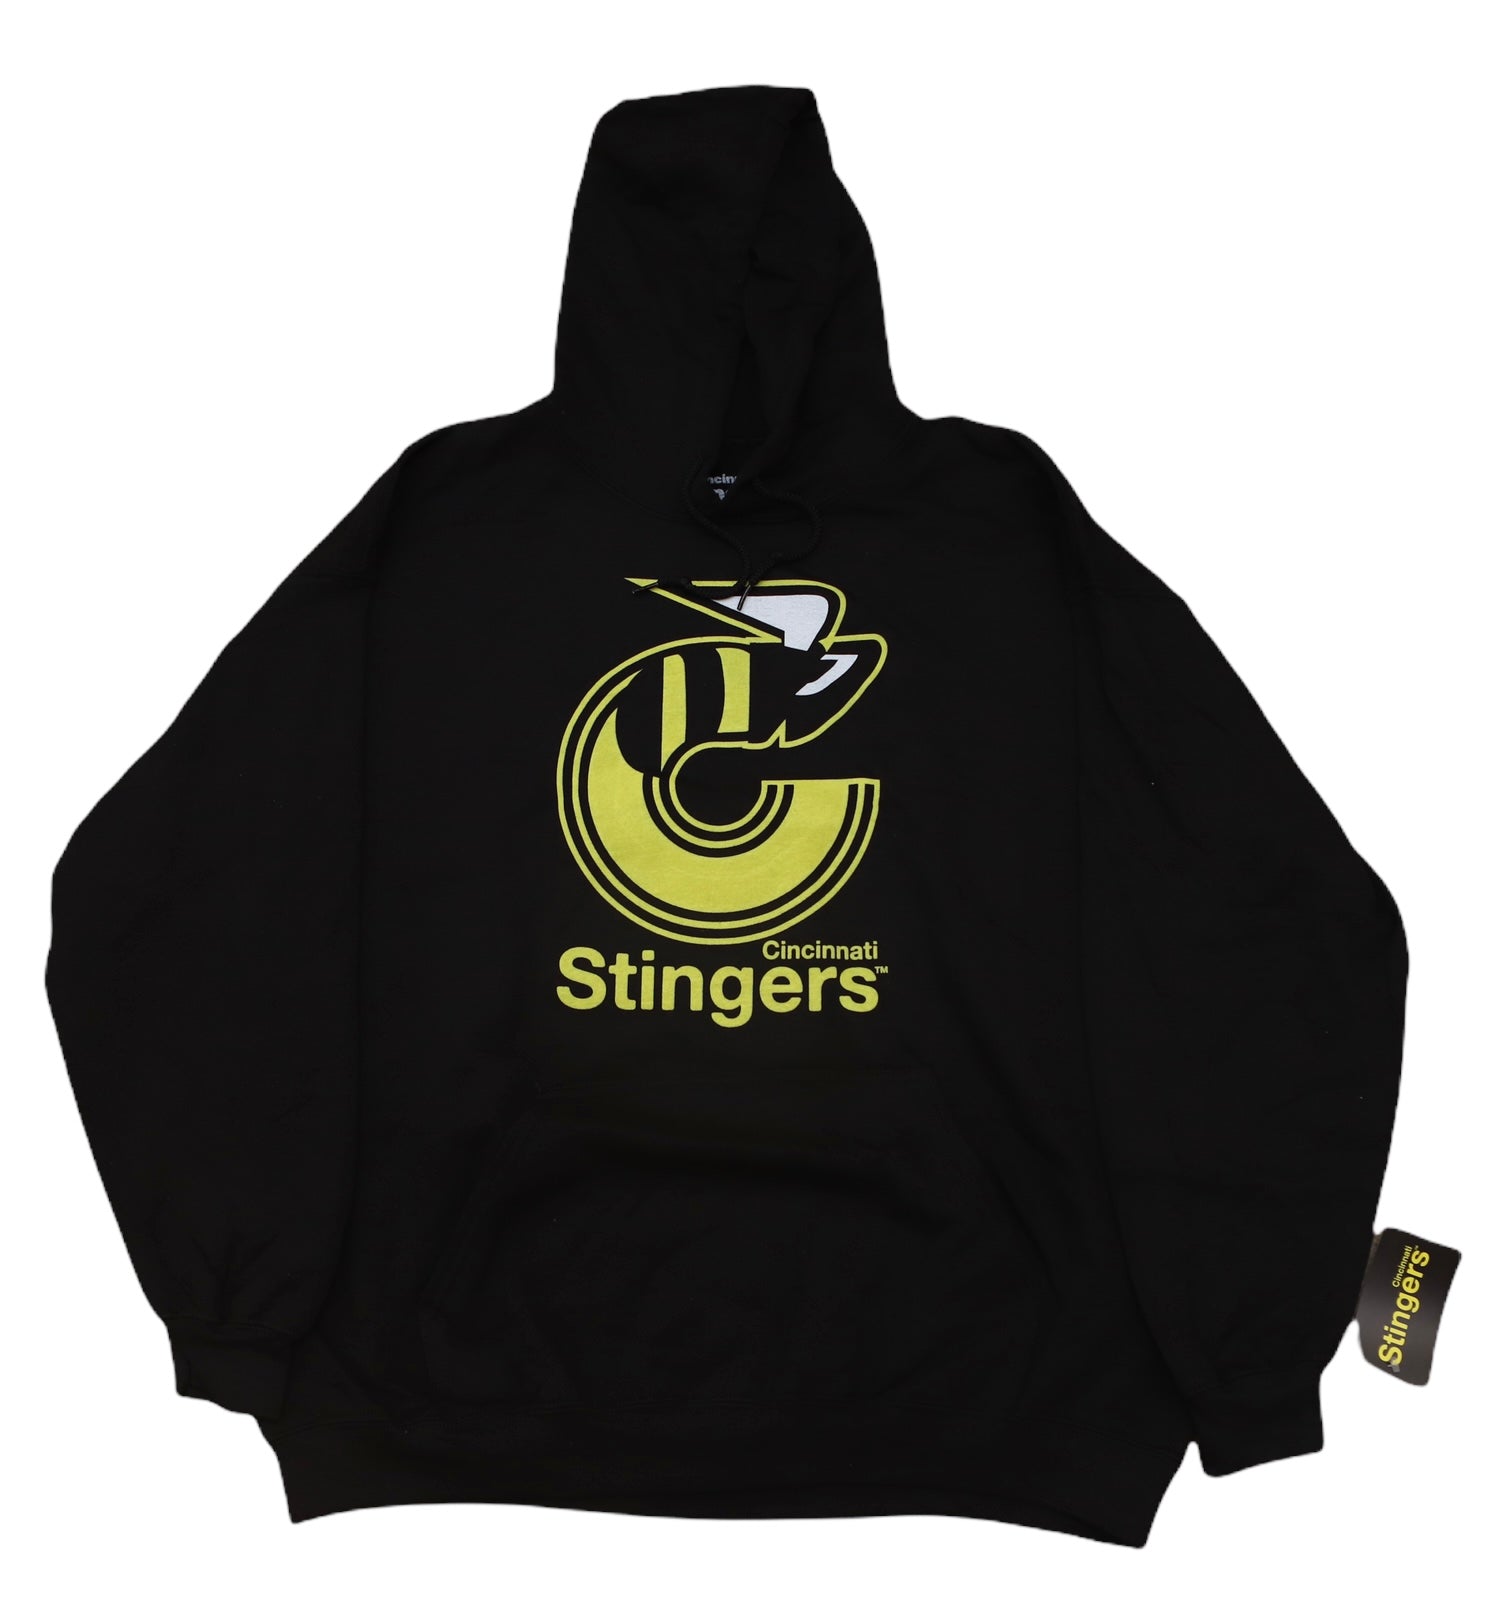 Cincinnati Stingers Concept, This concept is for the WHA's …